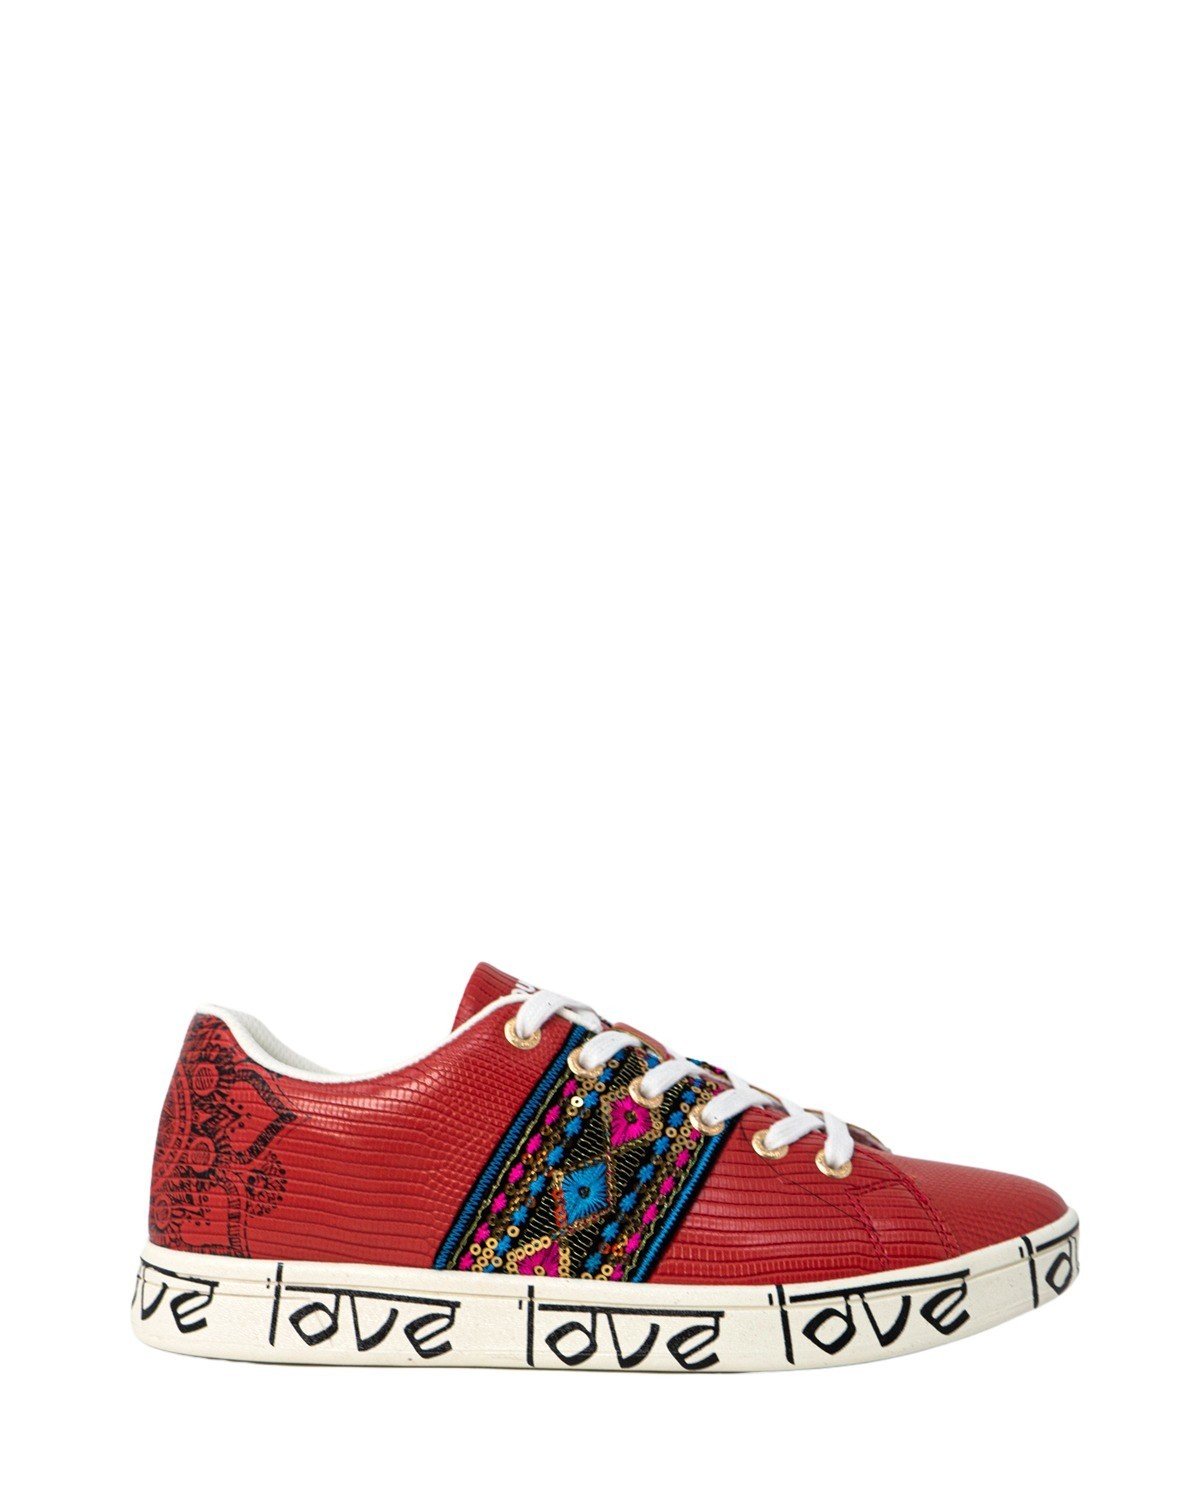 Desigual Women's Trainer Various Colours 203597 - red 37